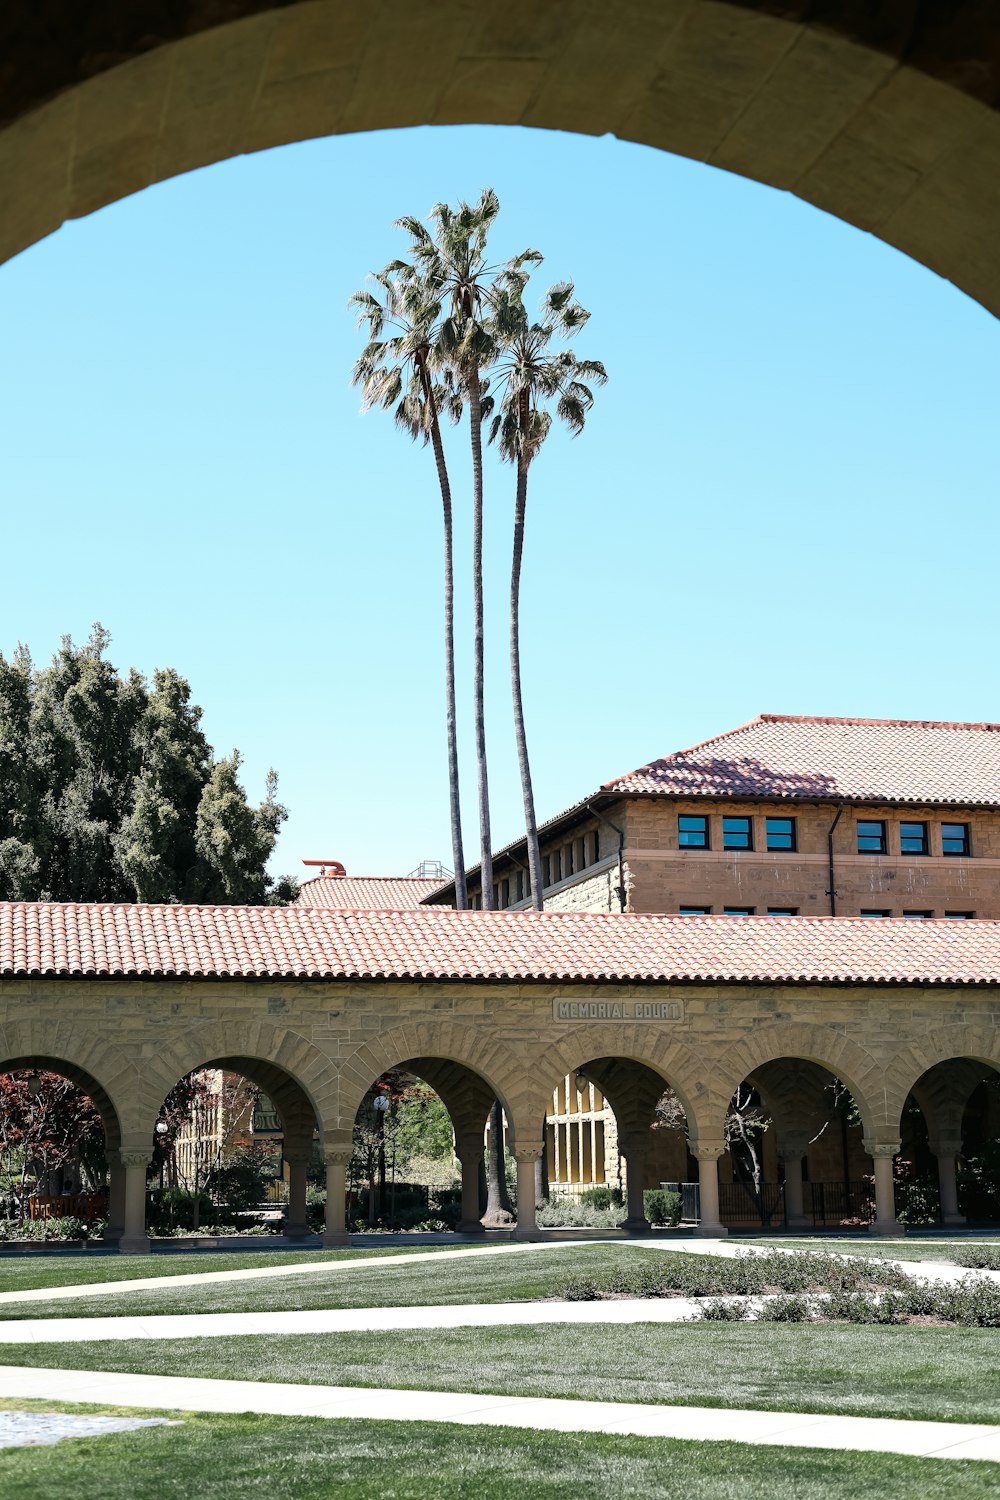 a building with arches and palm trees in the background